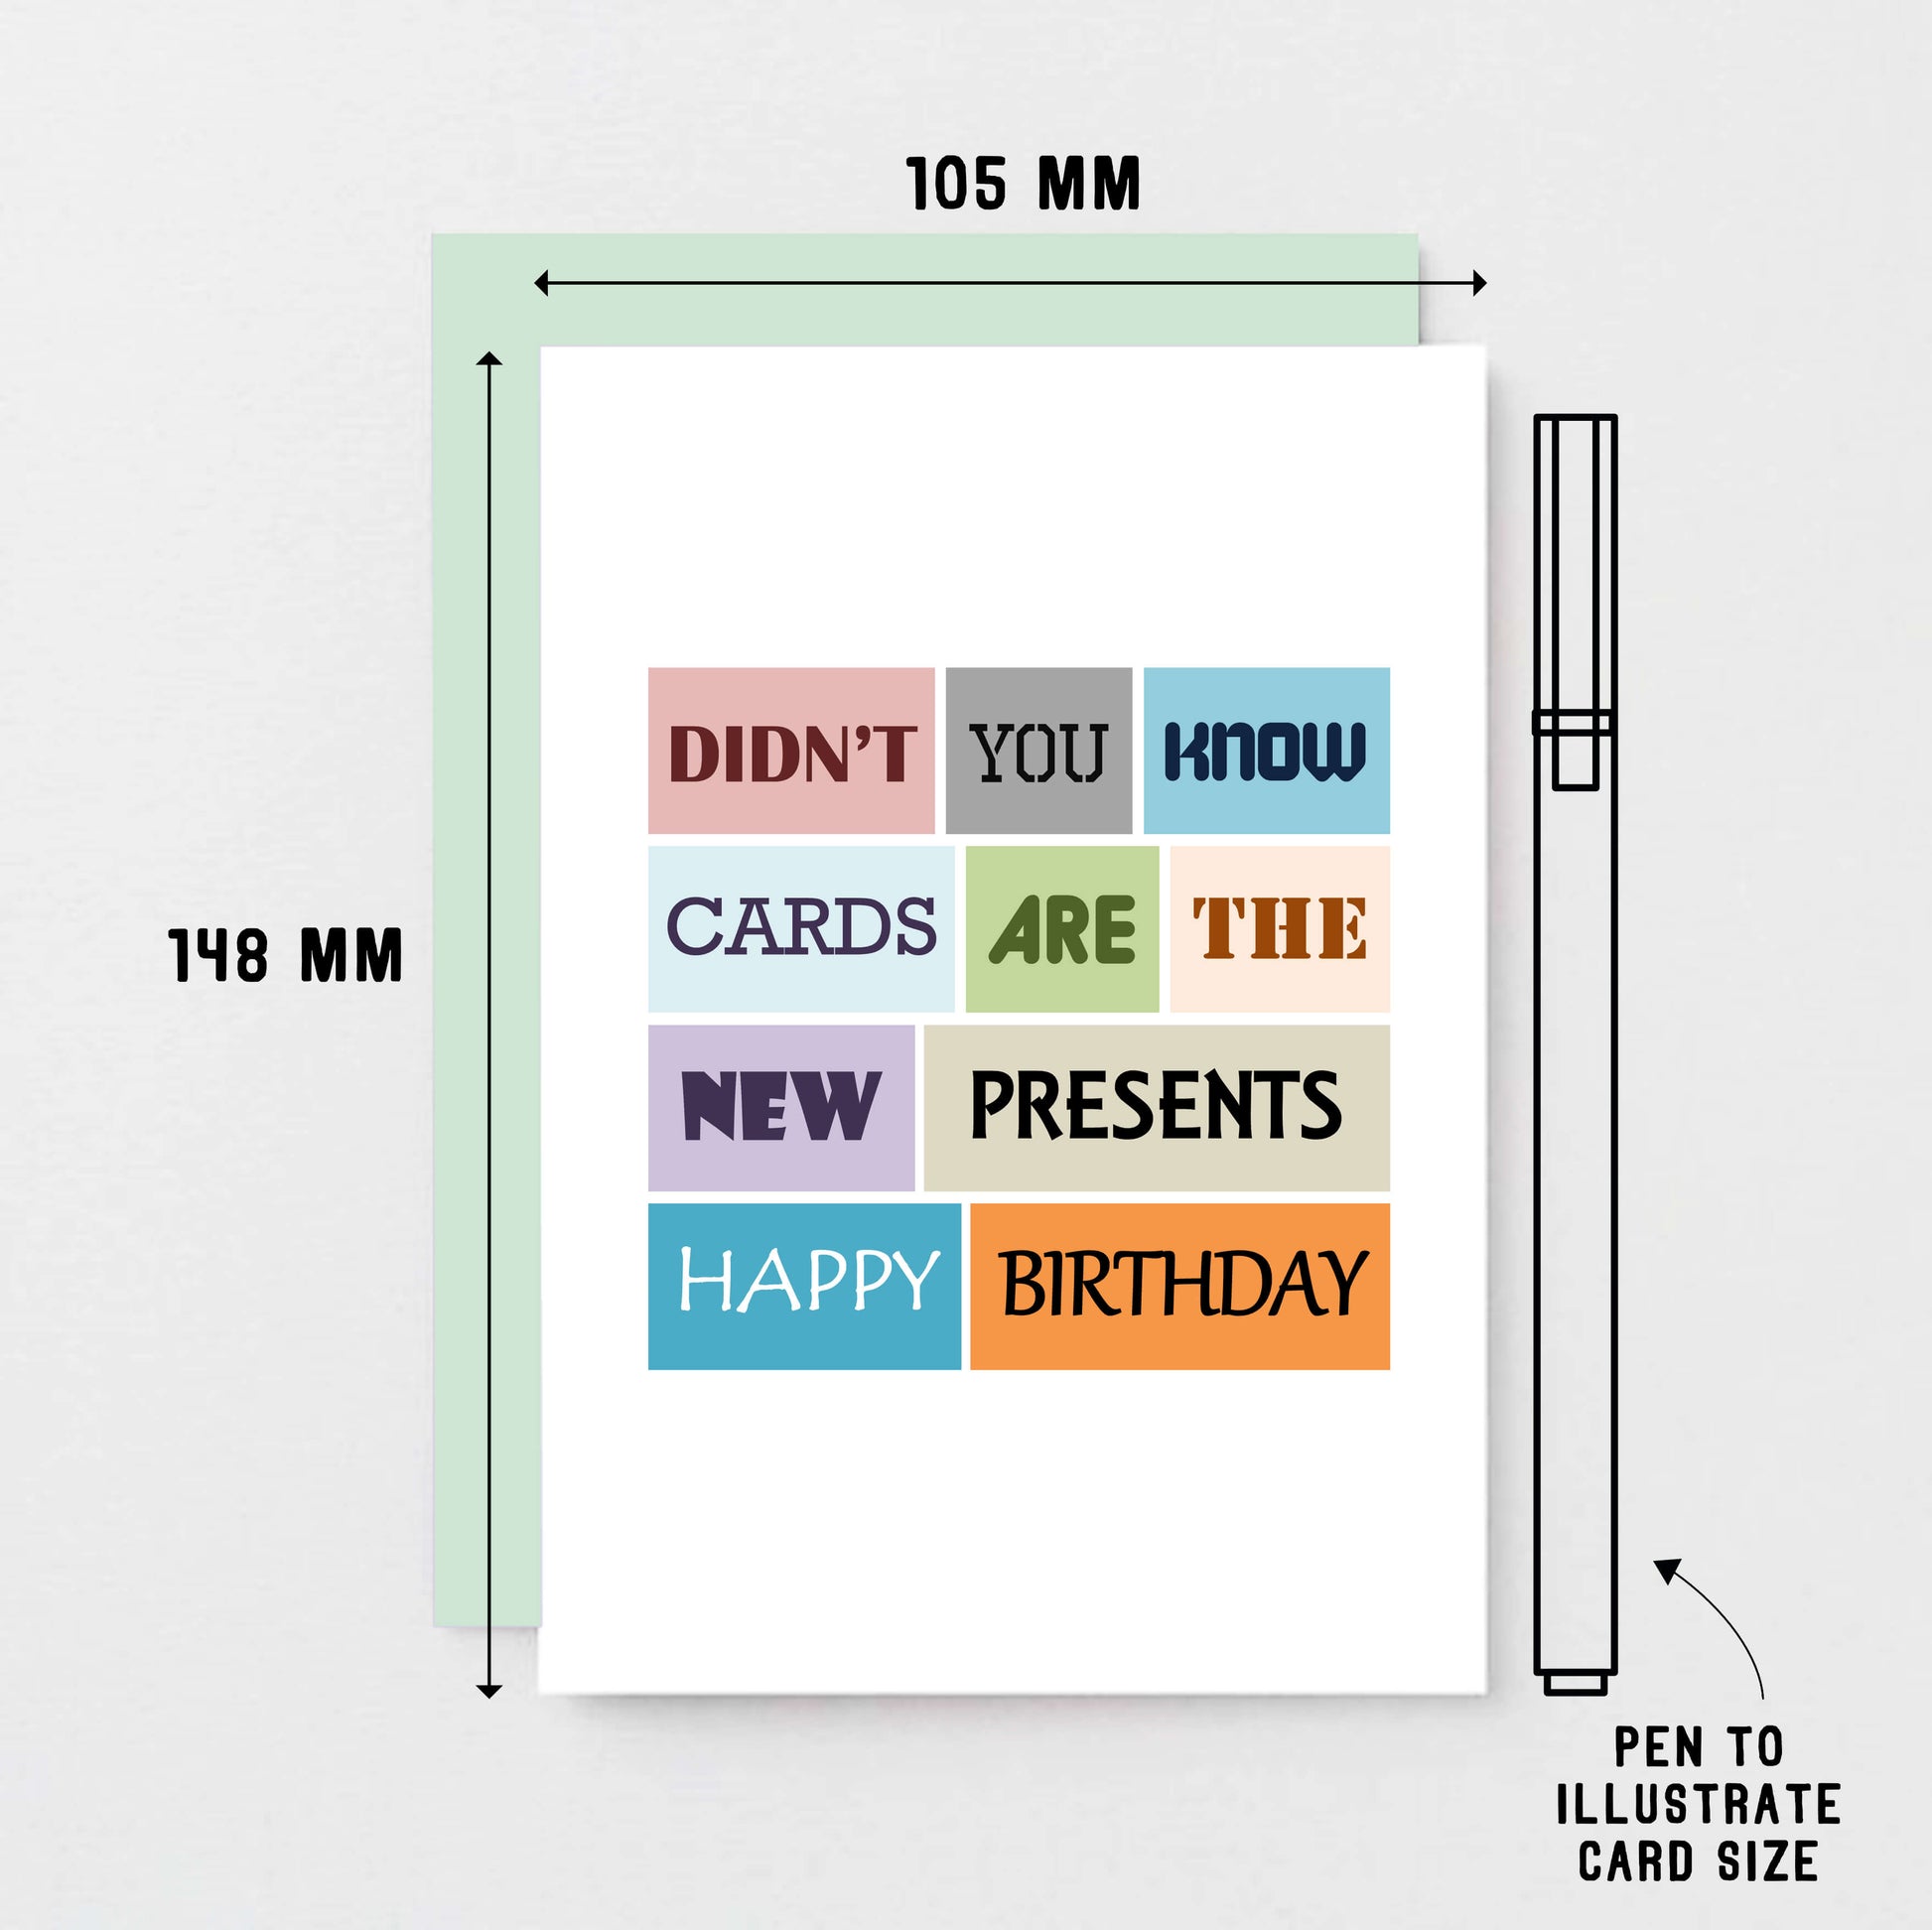 Birthday Card by SixElevenCreations. Reads Didn't you know cards are the new presents. Happy birthday. Product Code SE0023A6